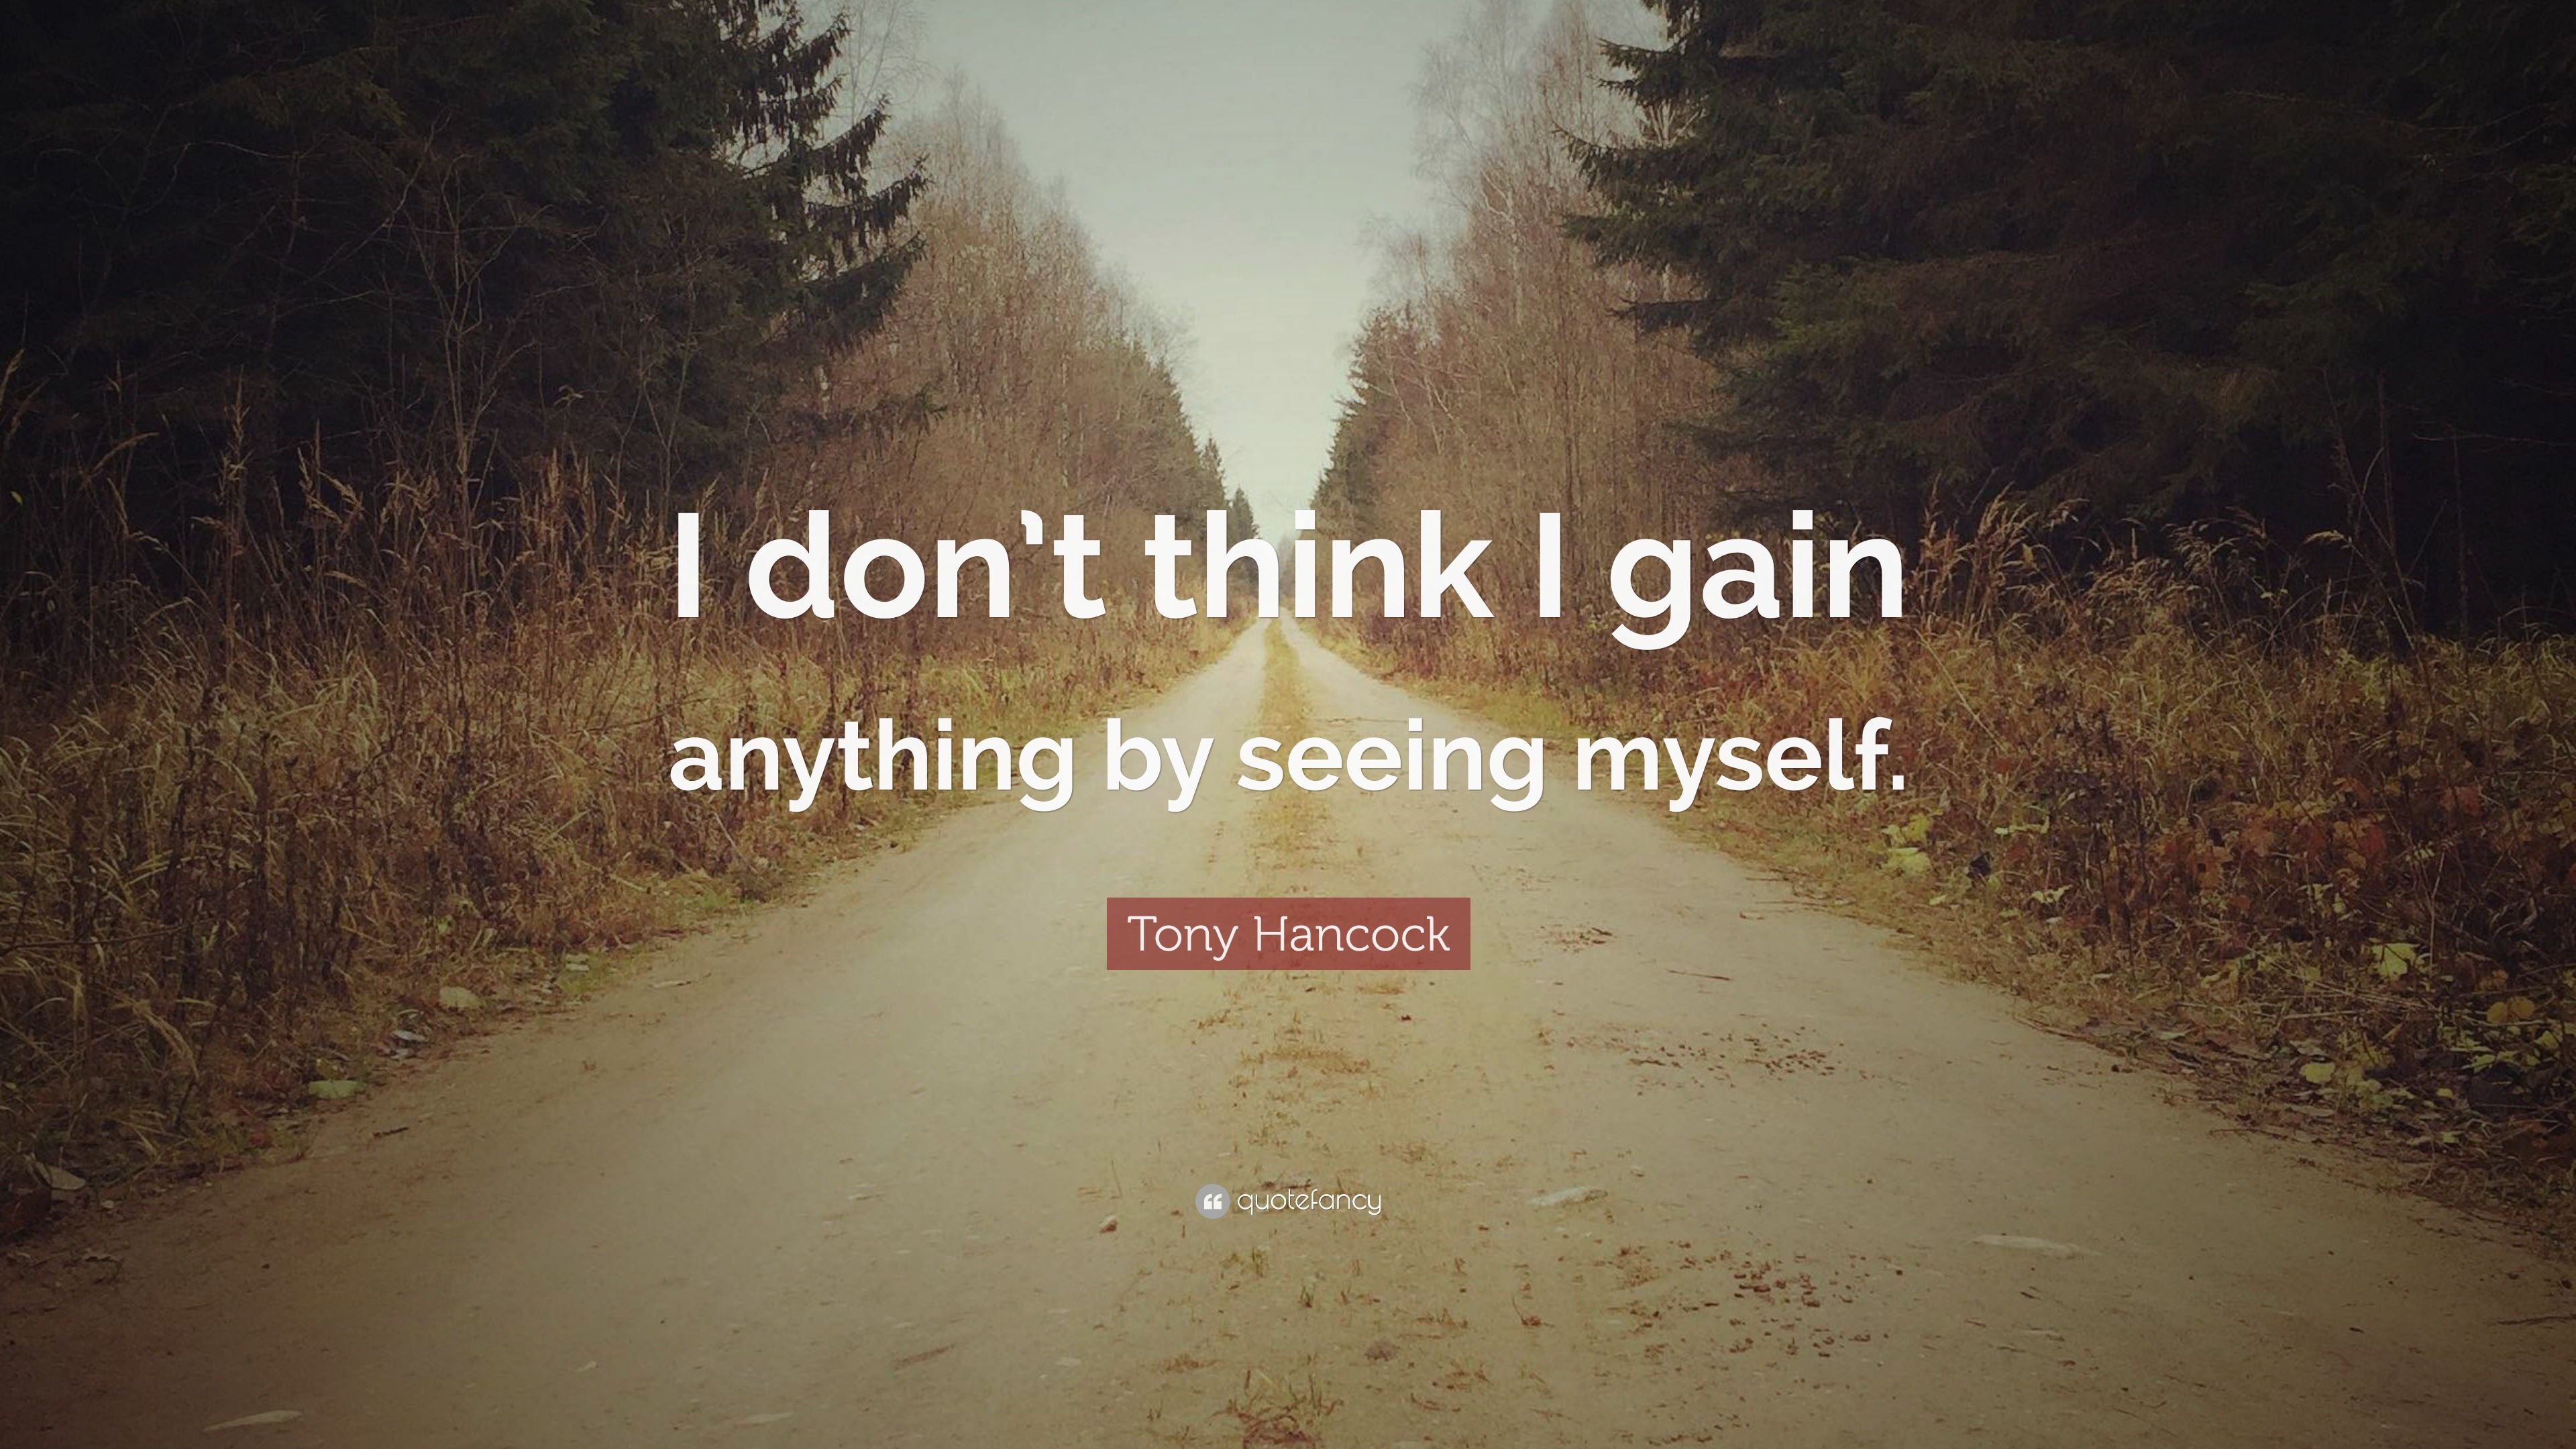 Tony Hancock Quote “i Dont Think I Gain Anything By Seeing Myself” 